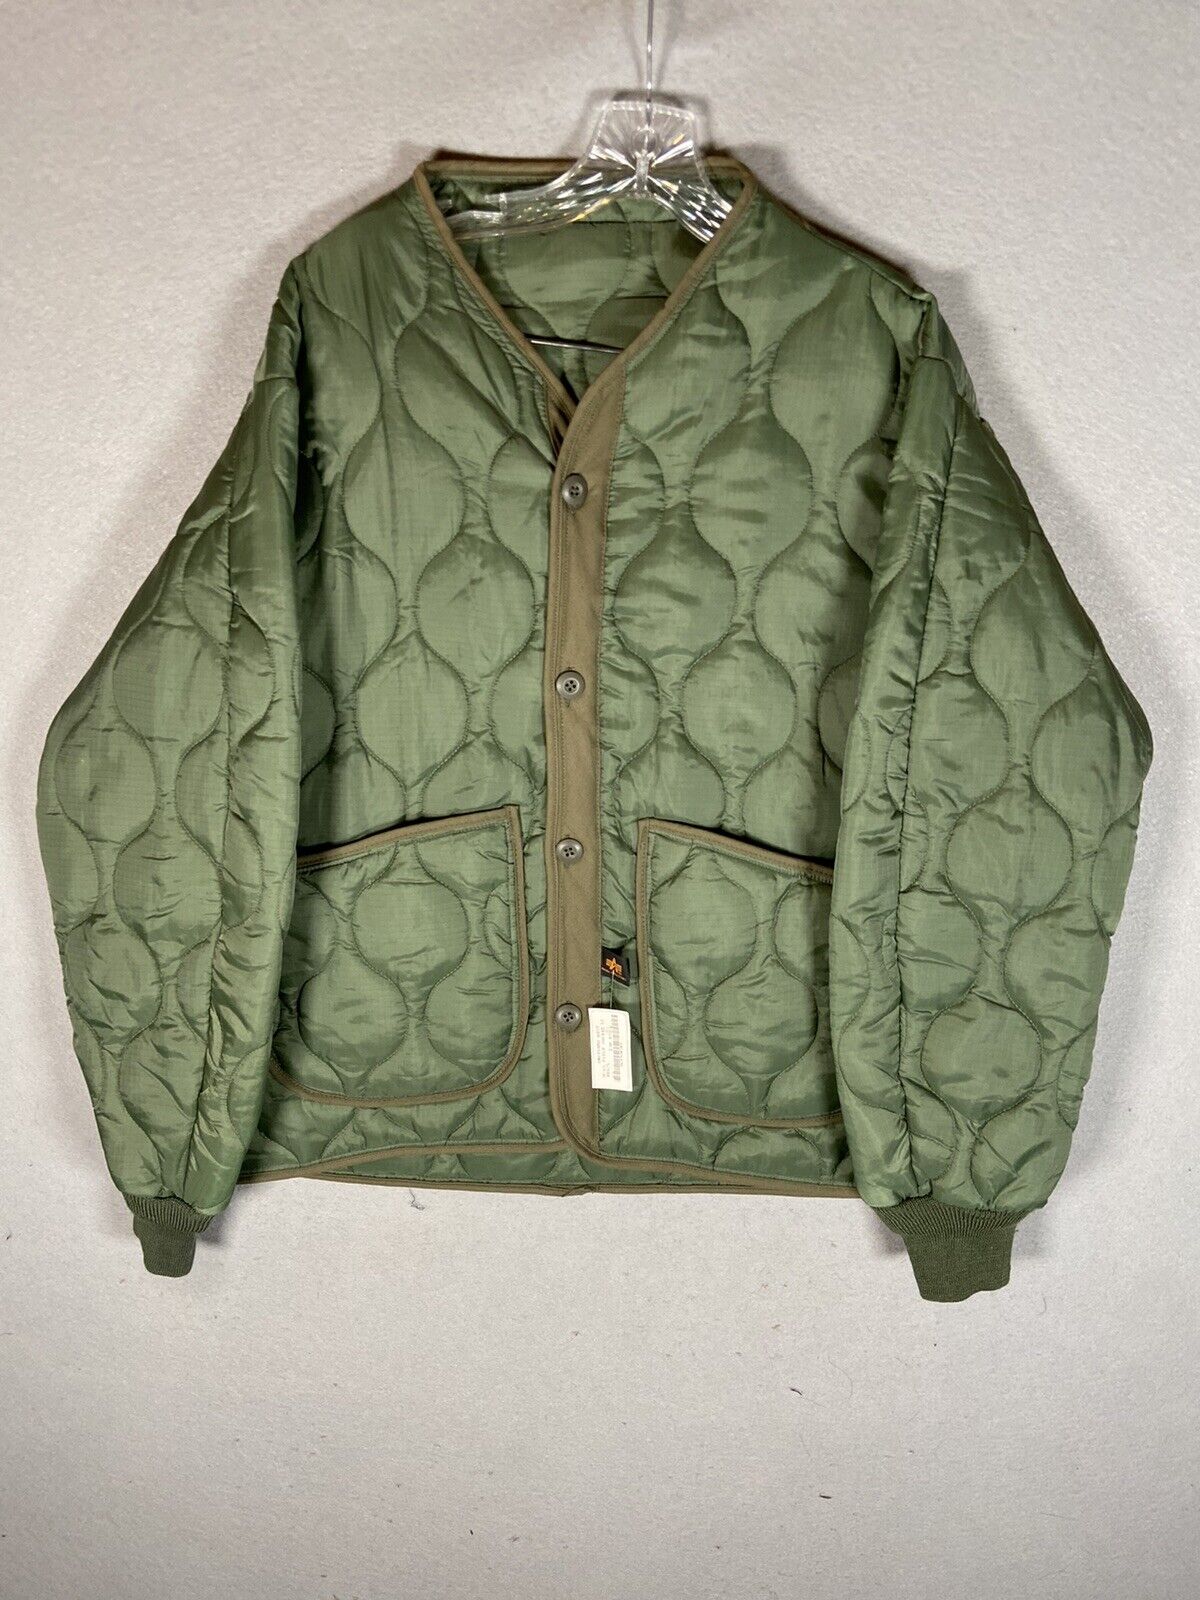 NWOT Alpha Industries Military FIELD JACKET QUILTED M-65 Green Size Large L